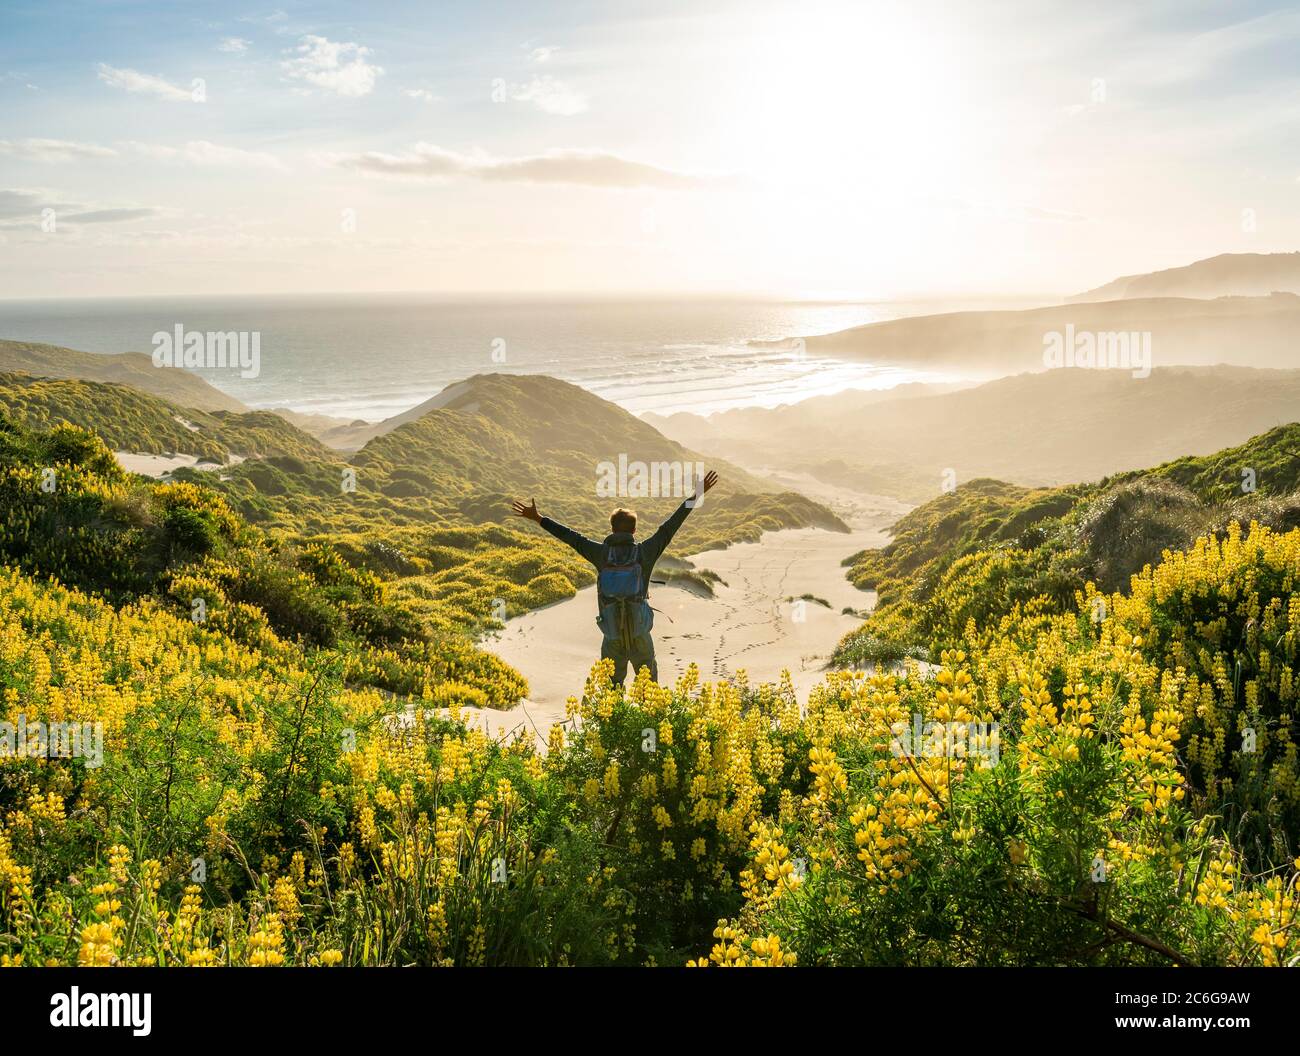 Young man stretching his arms in the air, yellow lupins (Lupinus luteus) on sand dunes, view of sandy beach on the coast, Sandfly Bay, Dunedin Stock Photo